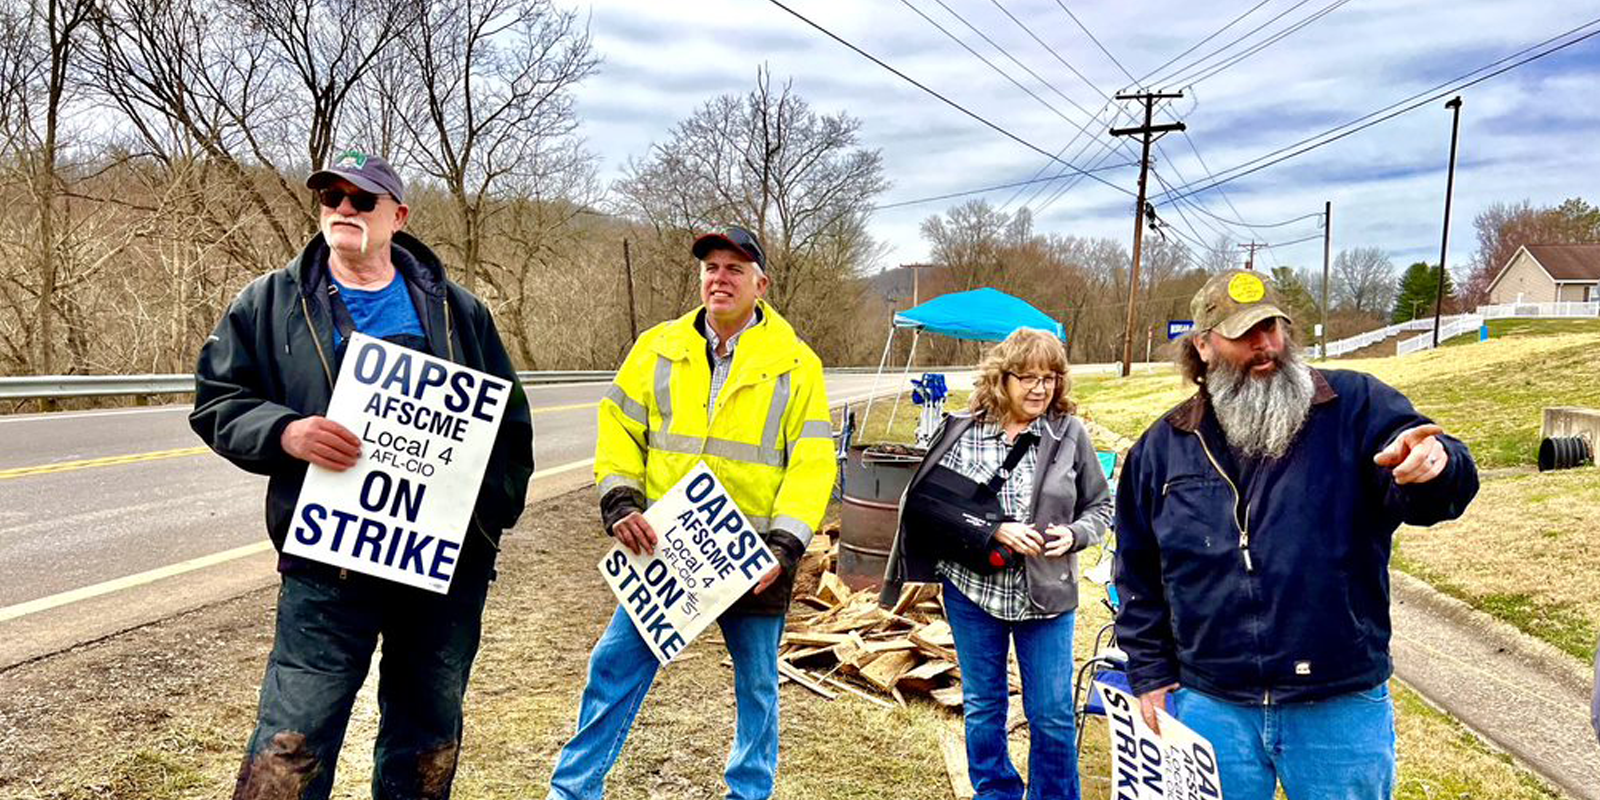 School support staff in Ohio county end strike after ratifying a fair contract offer